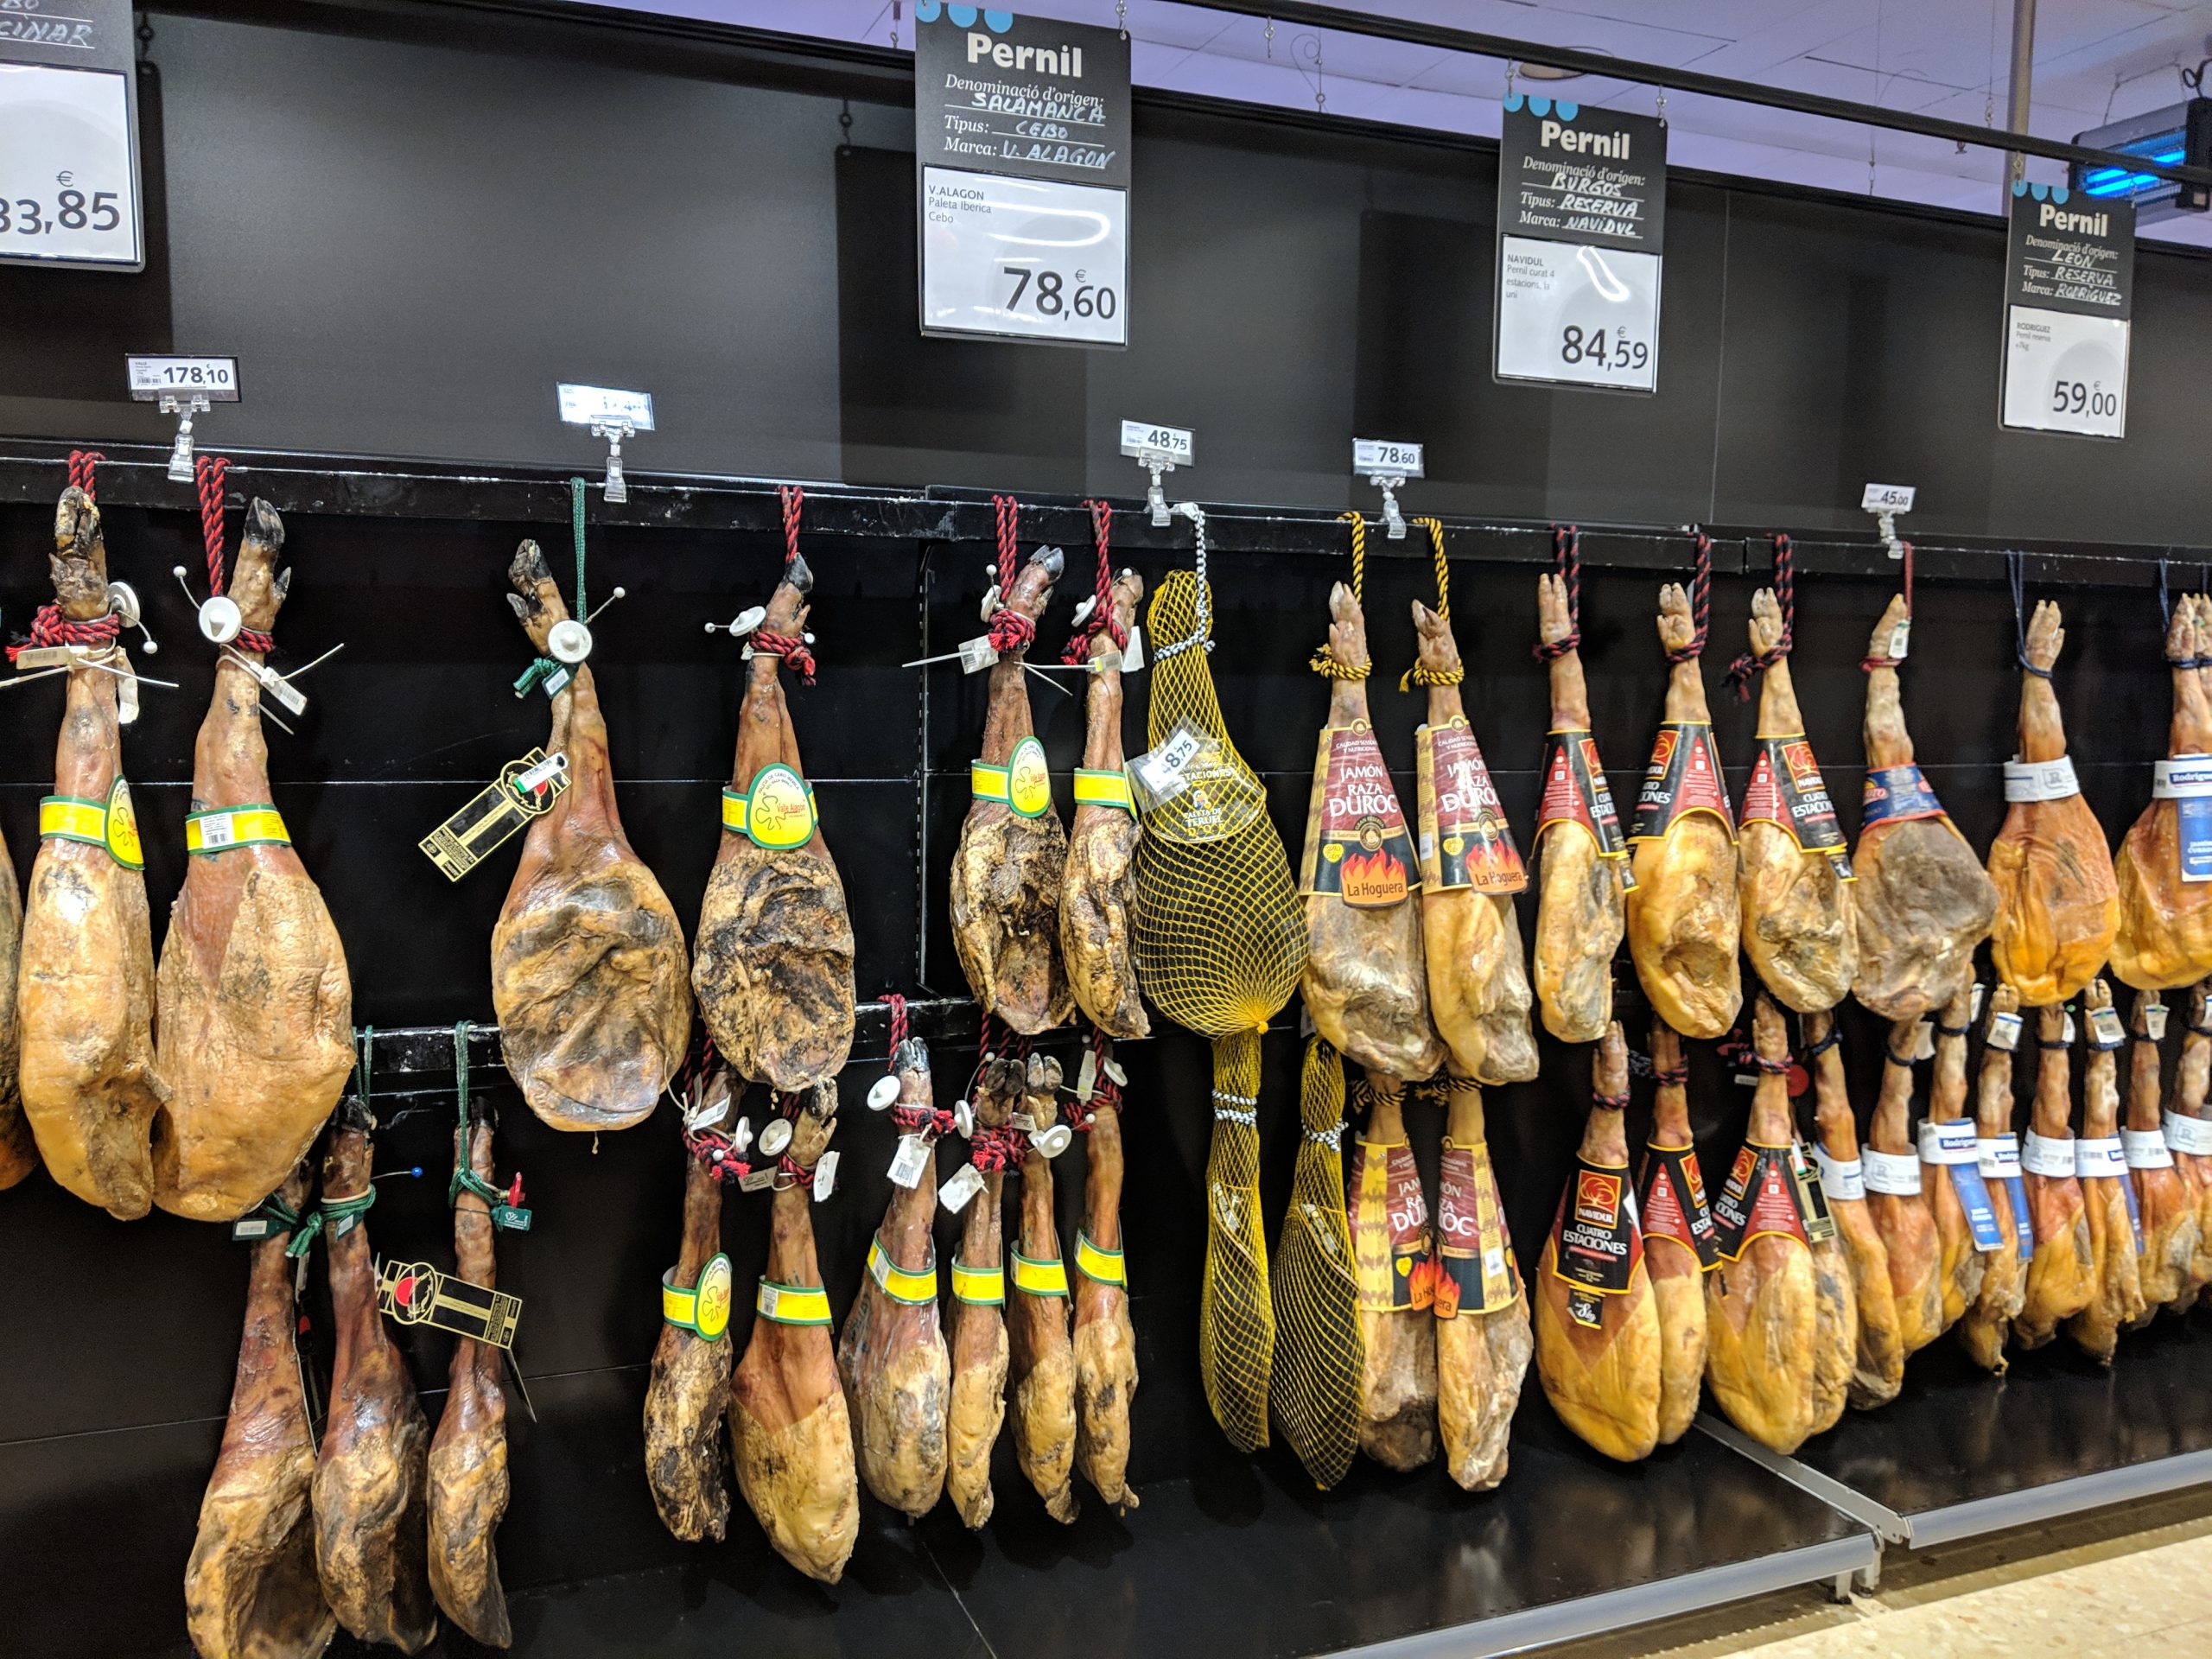 cured meat hanging in a store in Barcelona